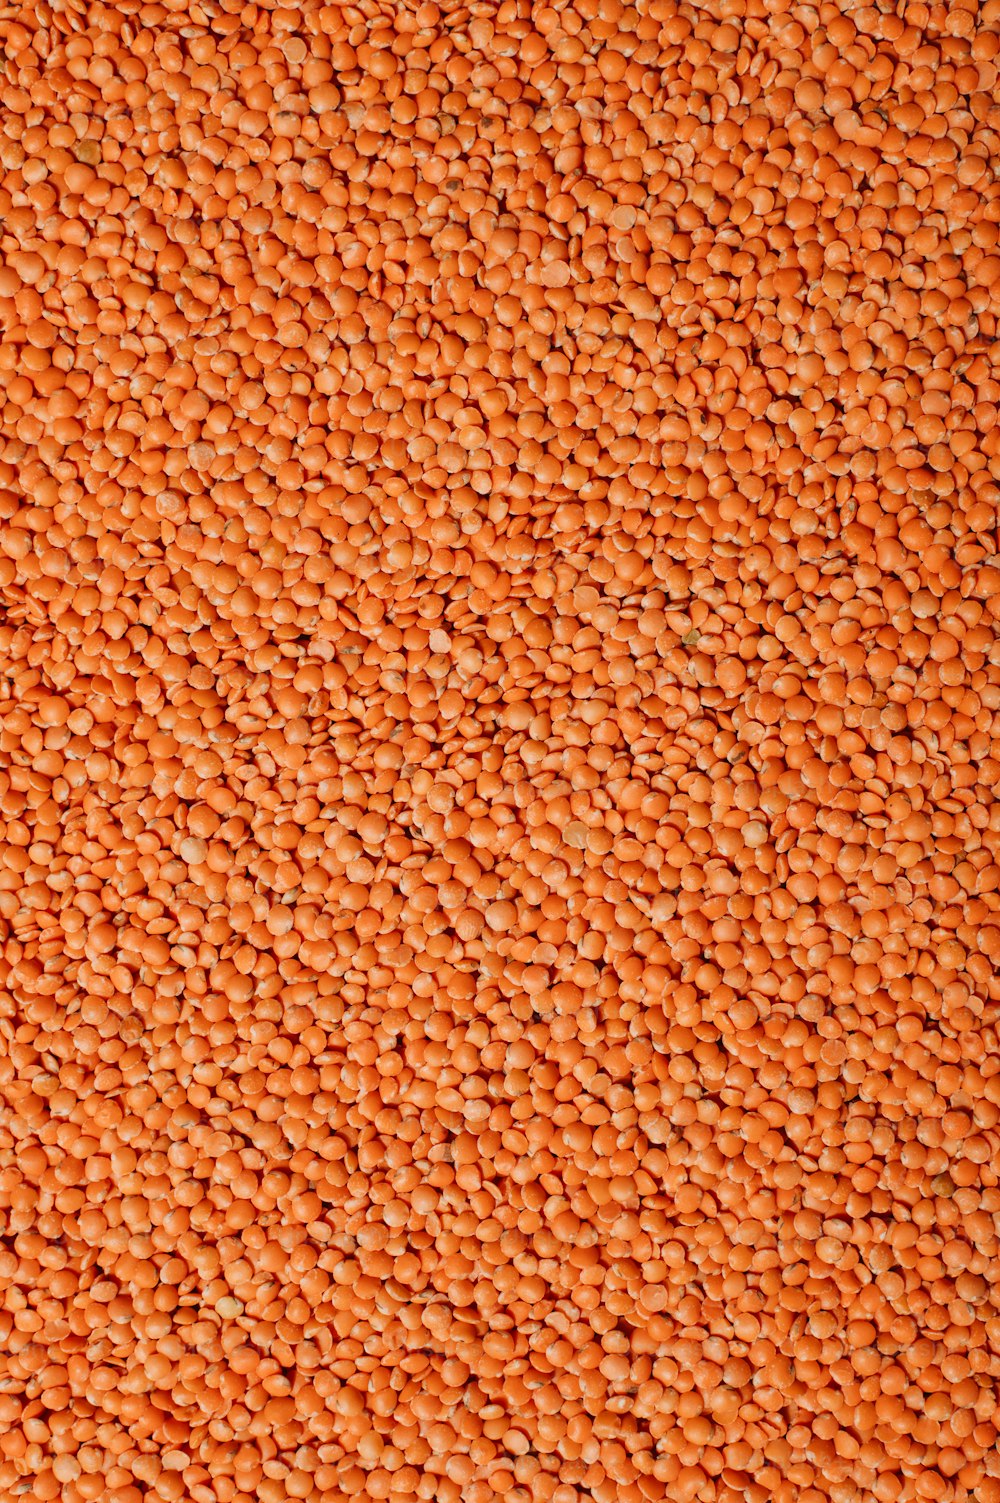 a large pile of grains